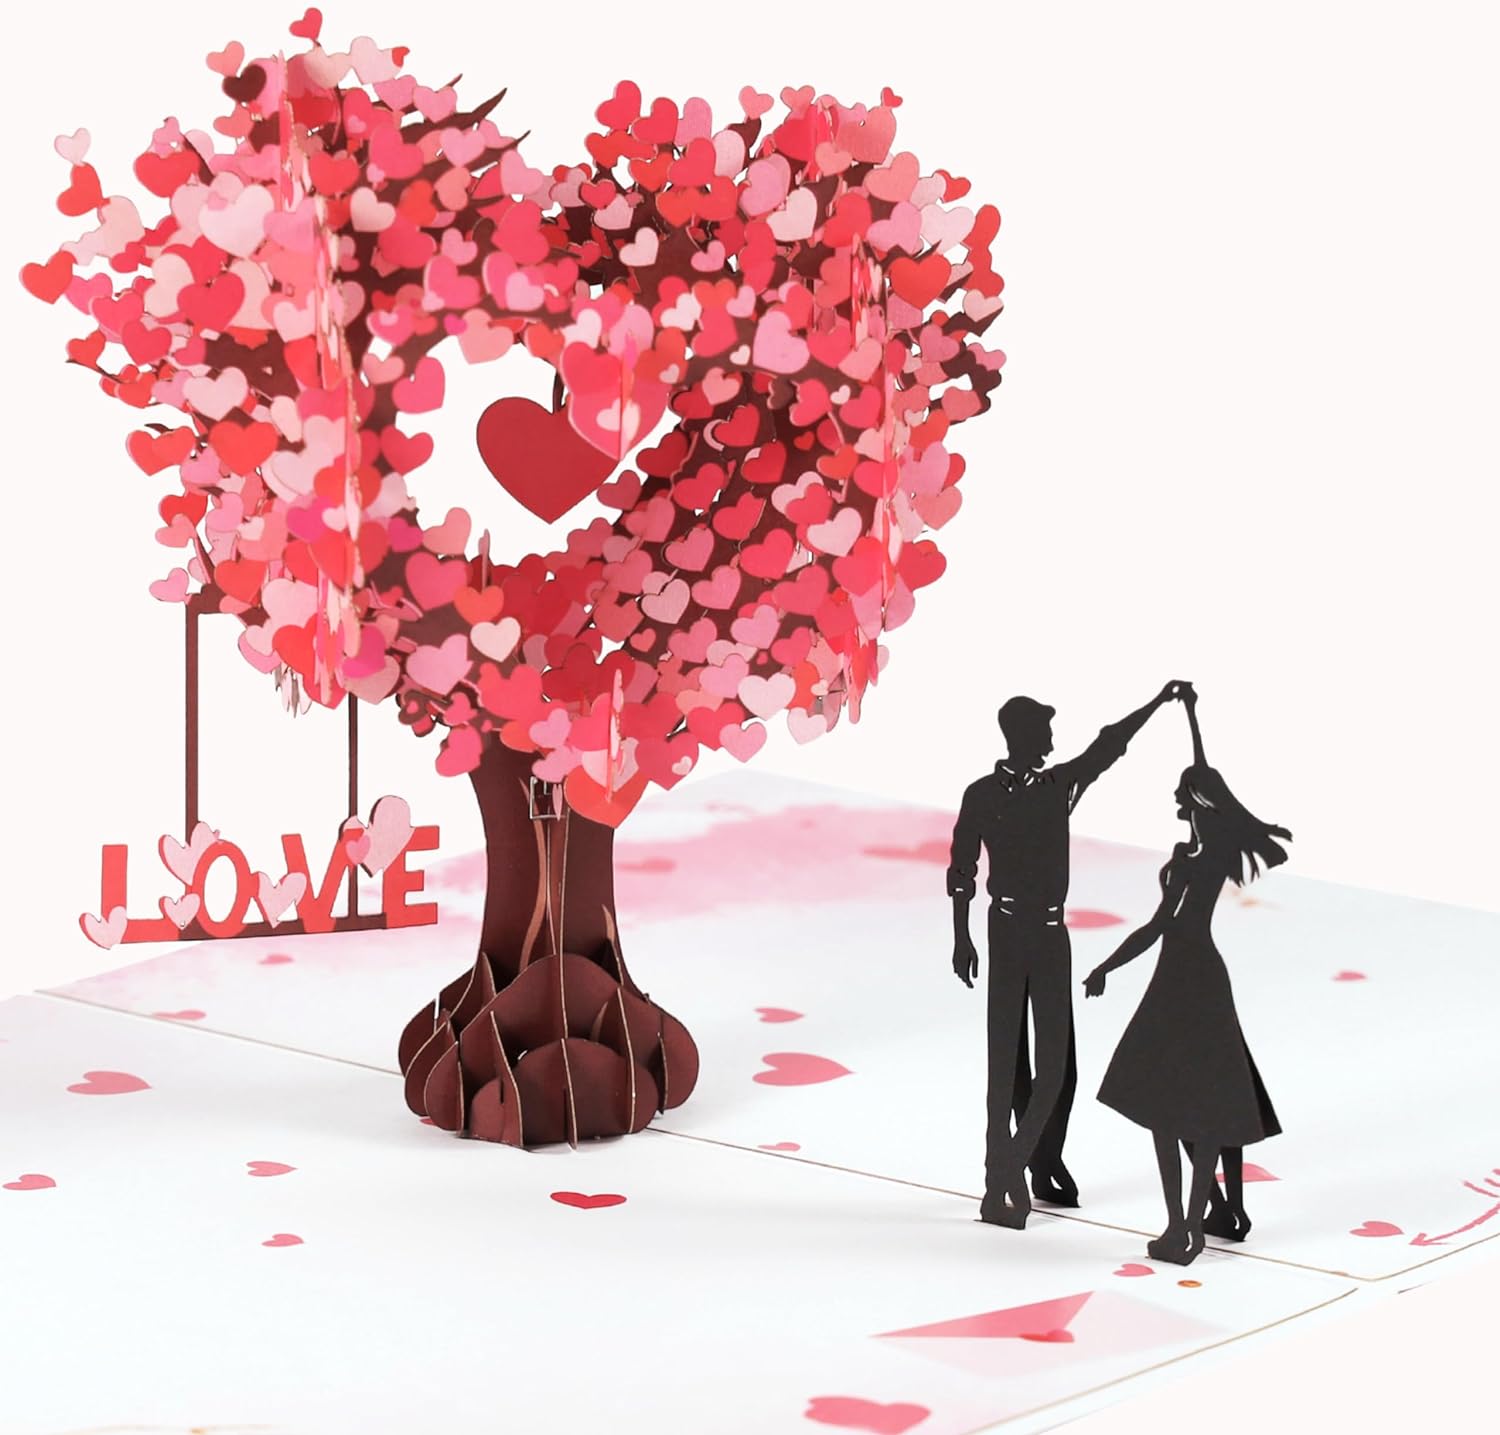 Love Tree Valentine's Day Pop-Up Cards - Romantic Love Greeting Card